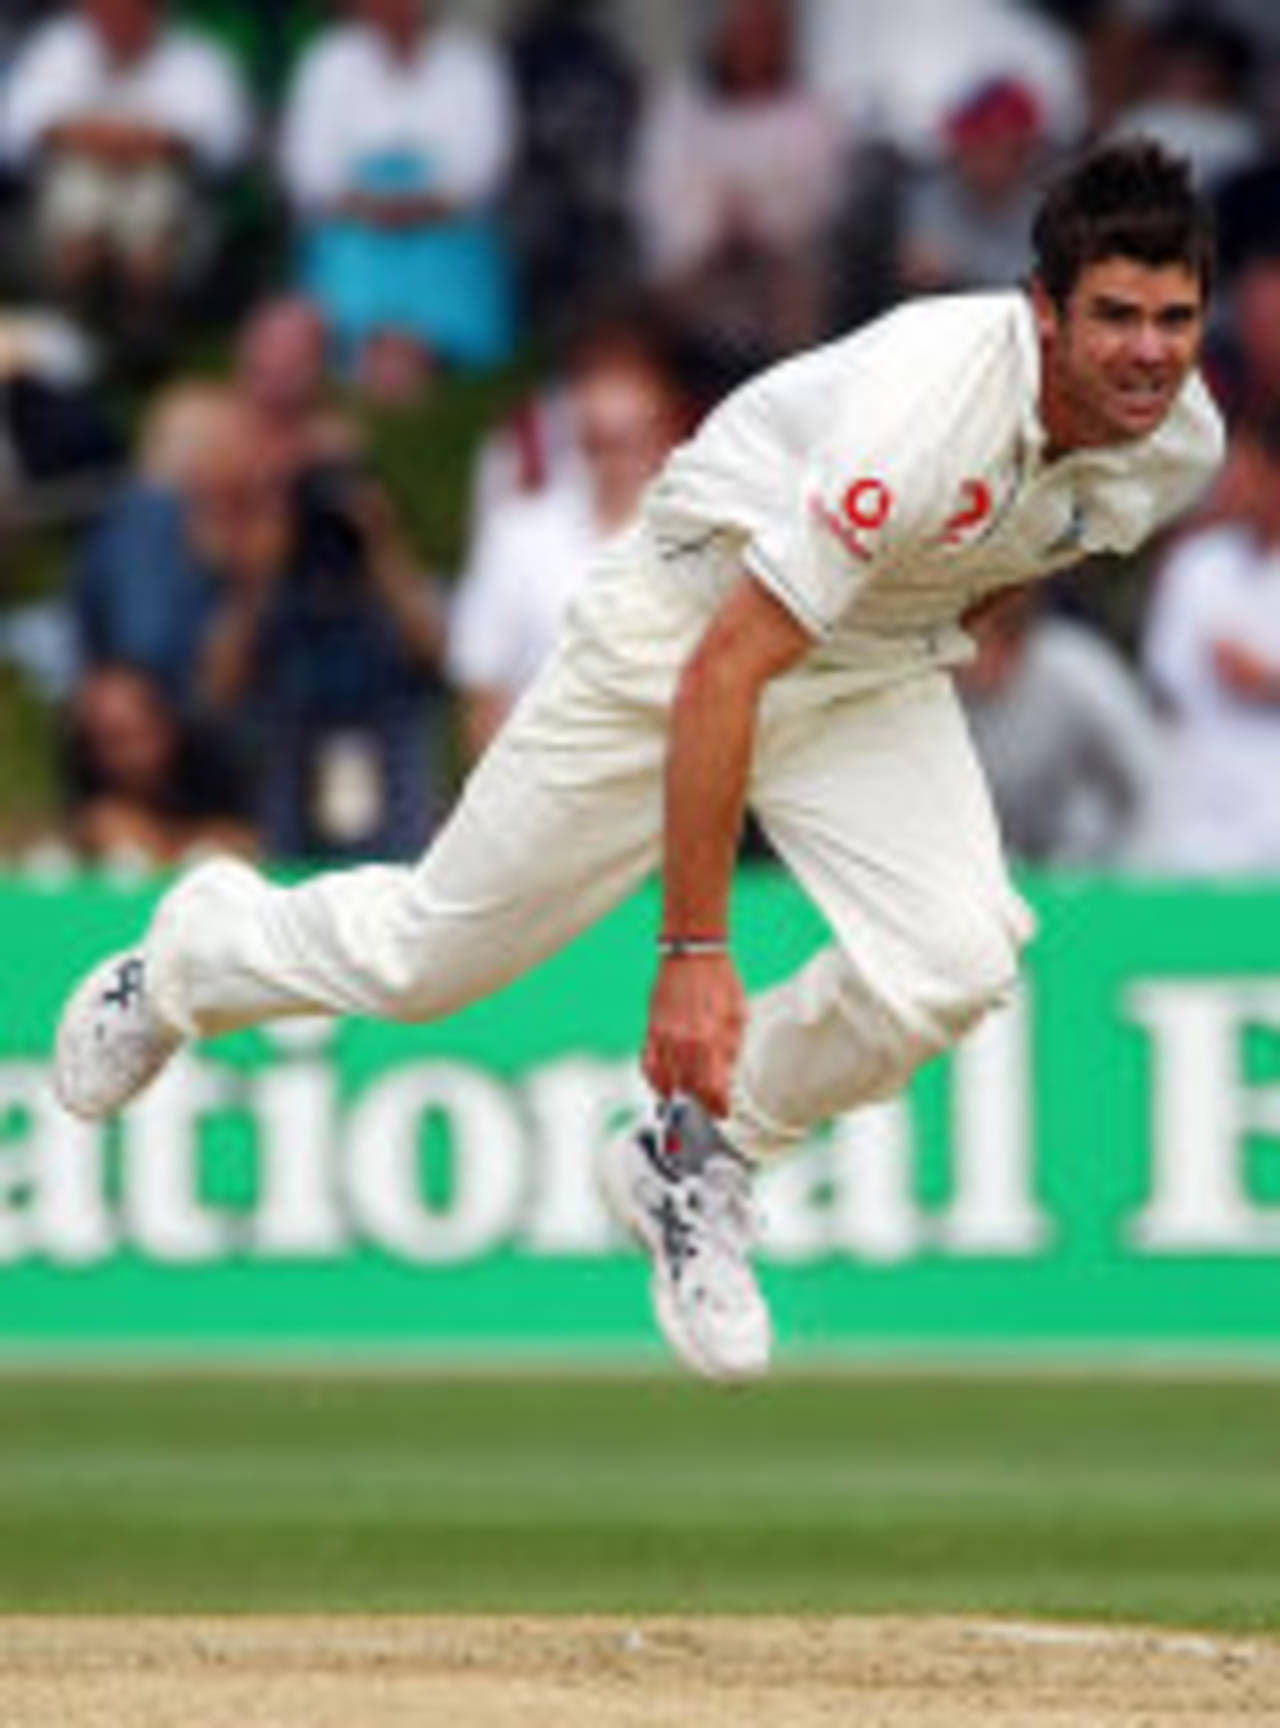 James Anderson in his follow-through, New Zealand v England, 2nd Test, Wellington, March 14, 2008